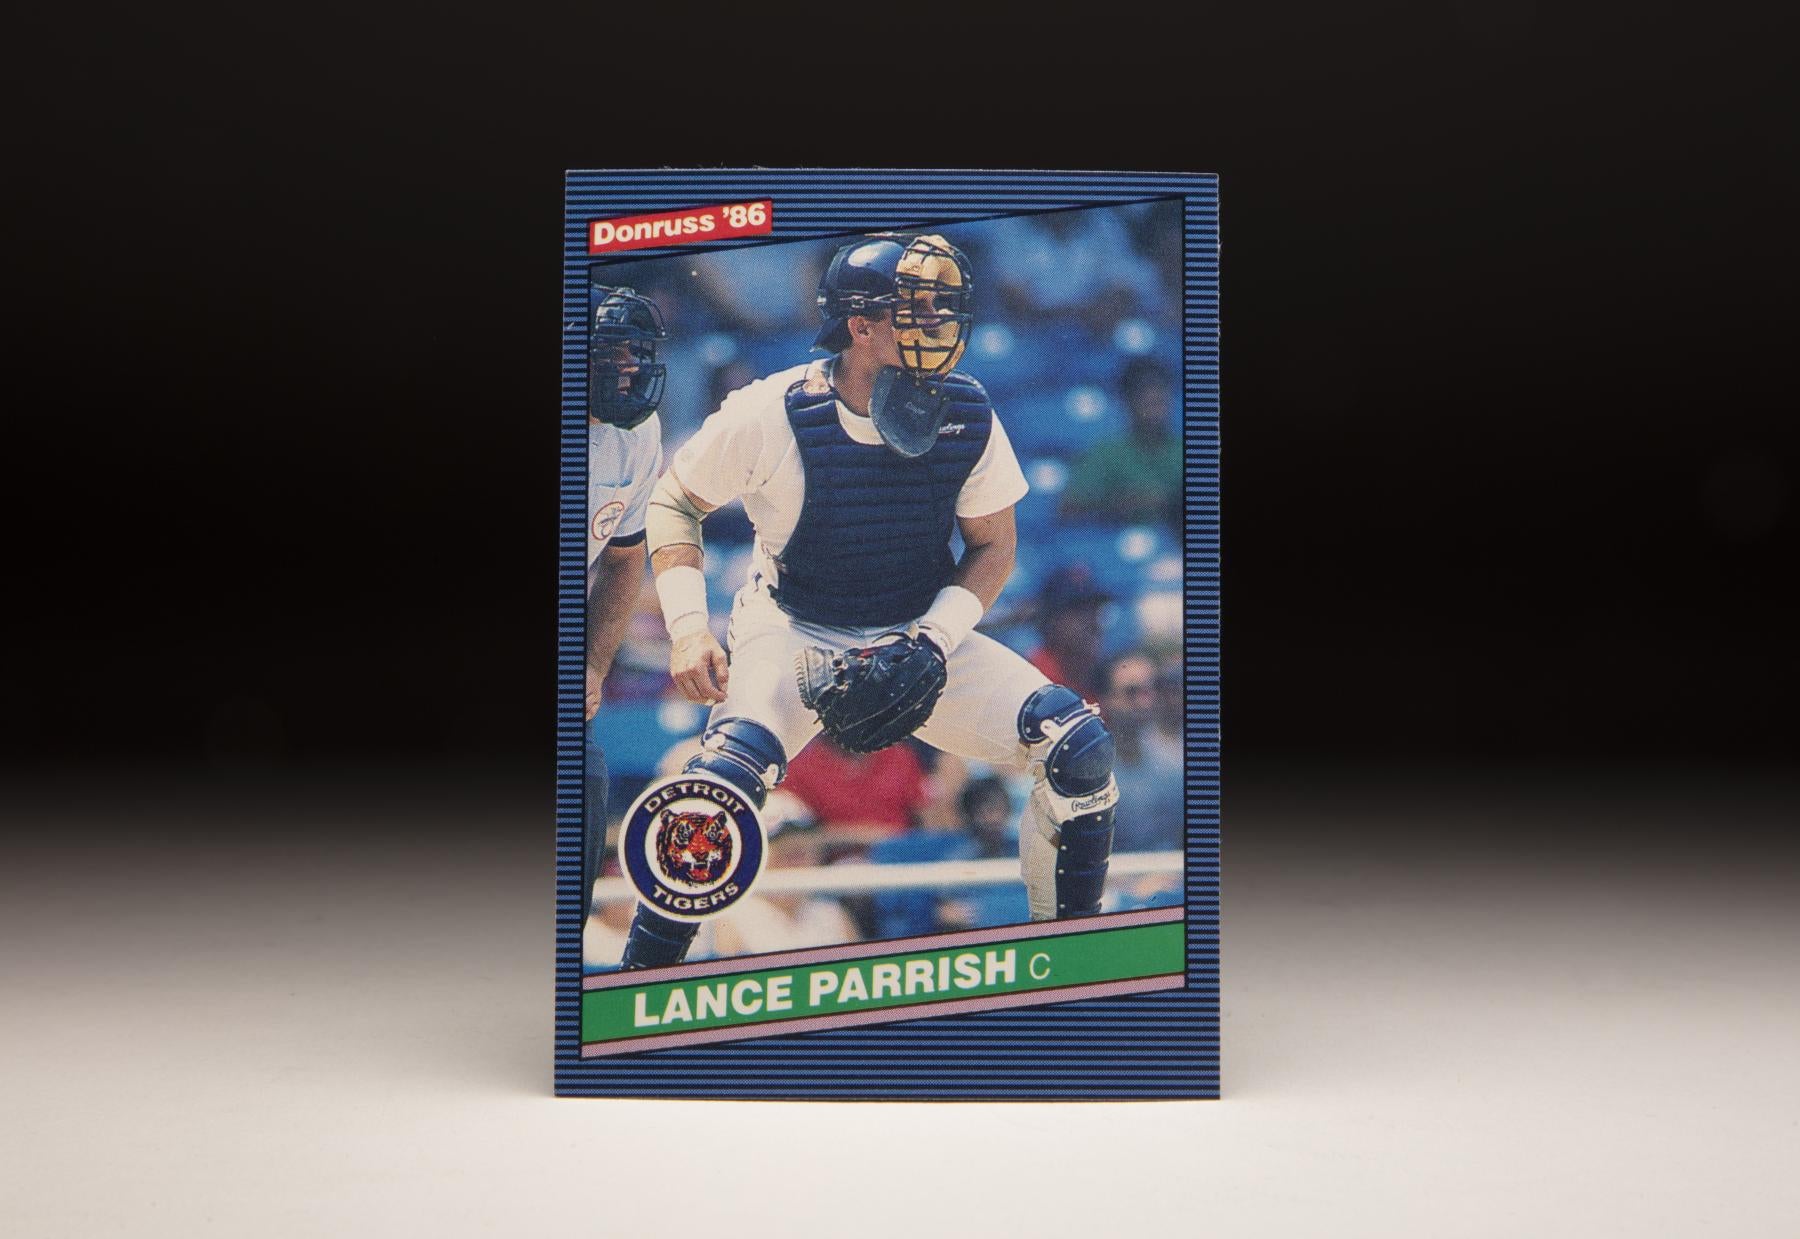 Also known as Big Wheel, Lance Parrish played for the Tigers